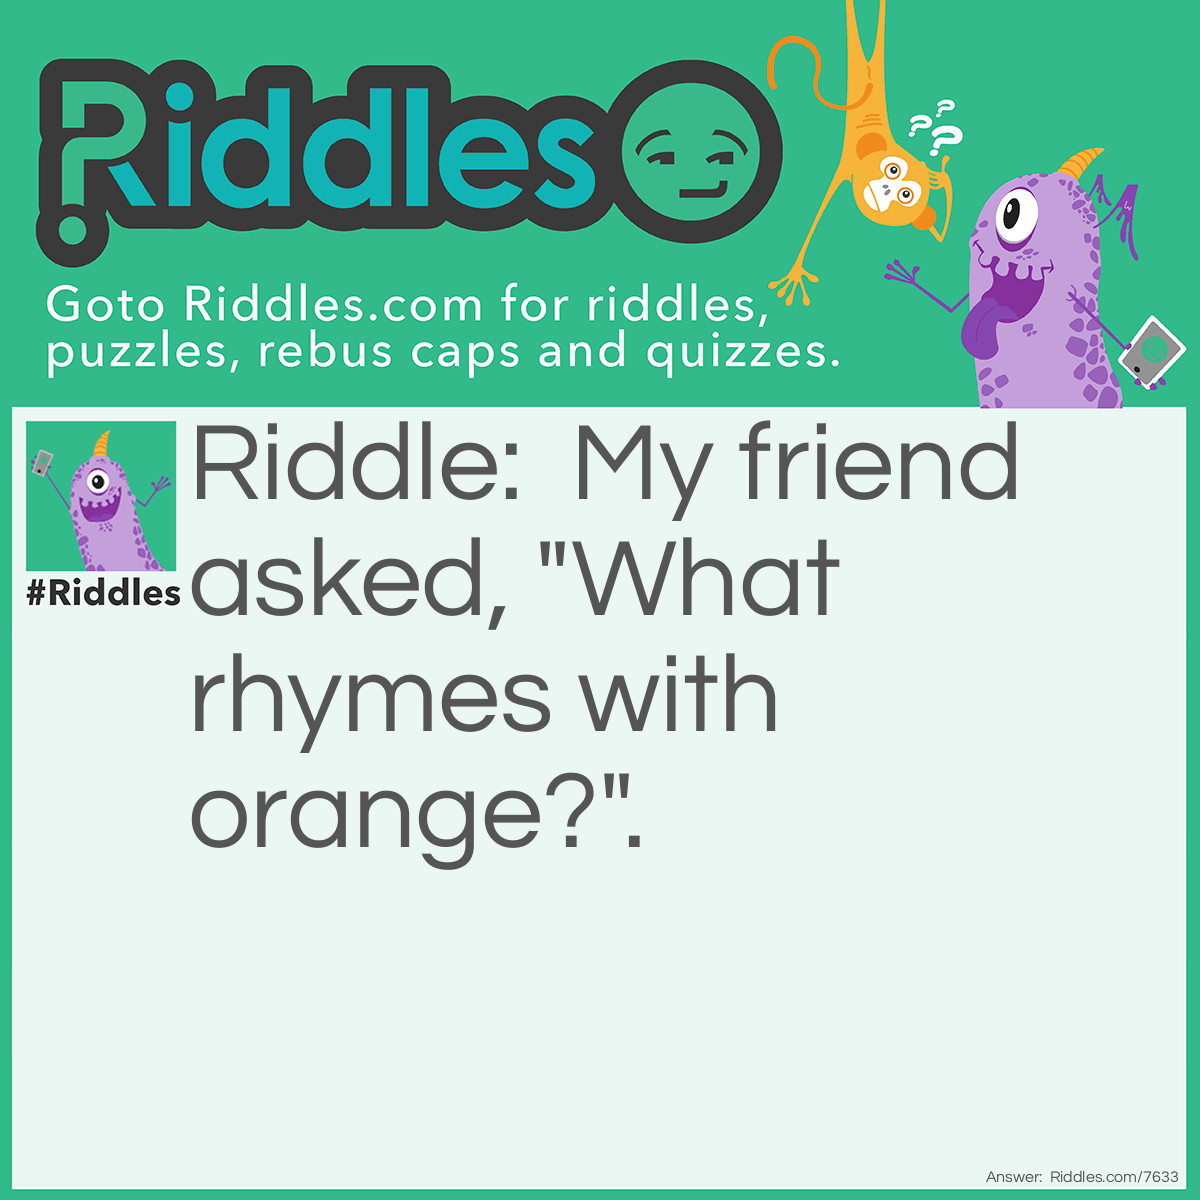 Riddle: My friend asked, "What rhymes with orange?". Answer: I said, "No it doesn't".